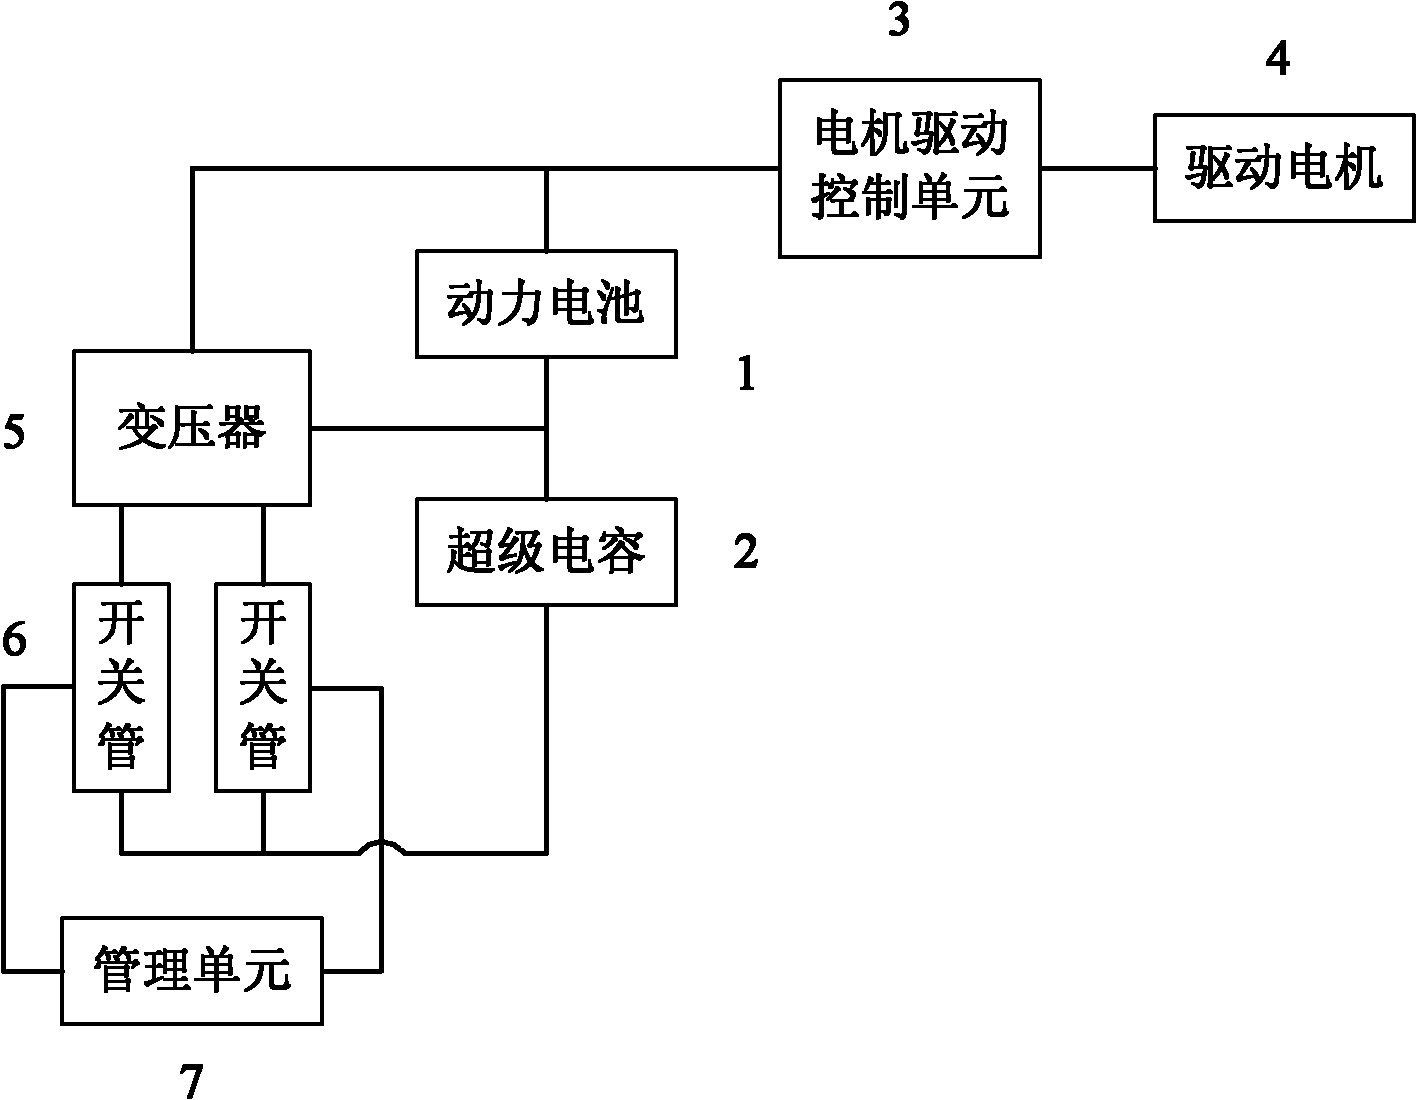 Energy management system for electric automobile and management method therefor